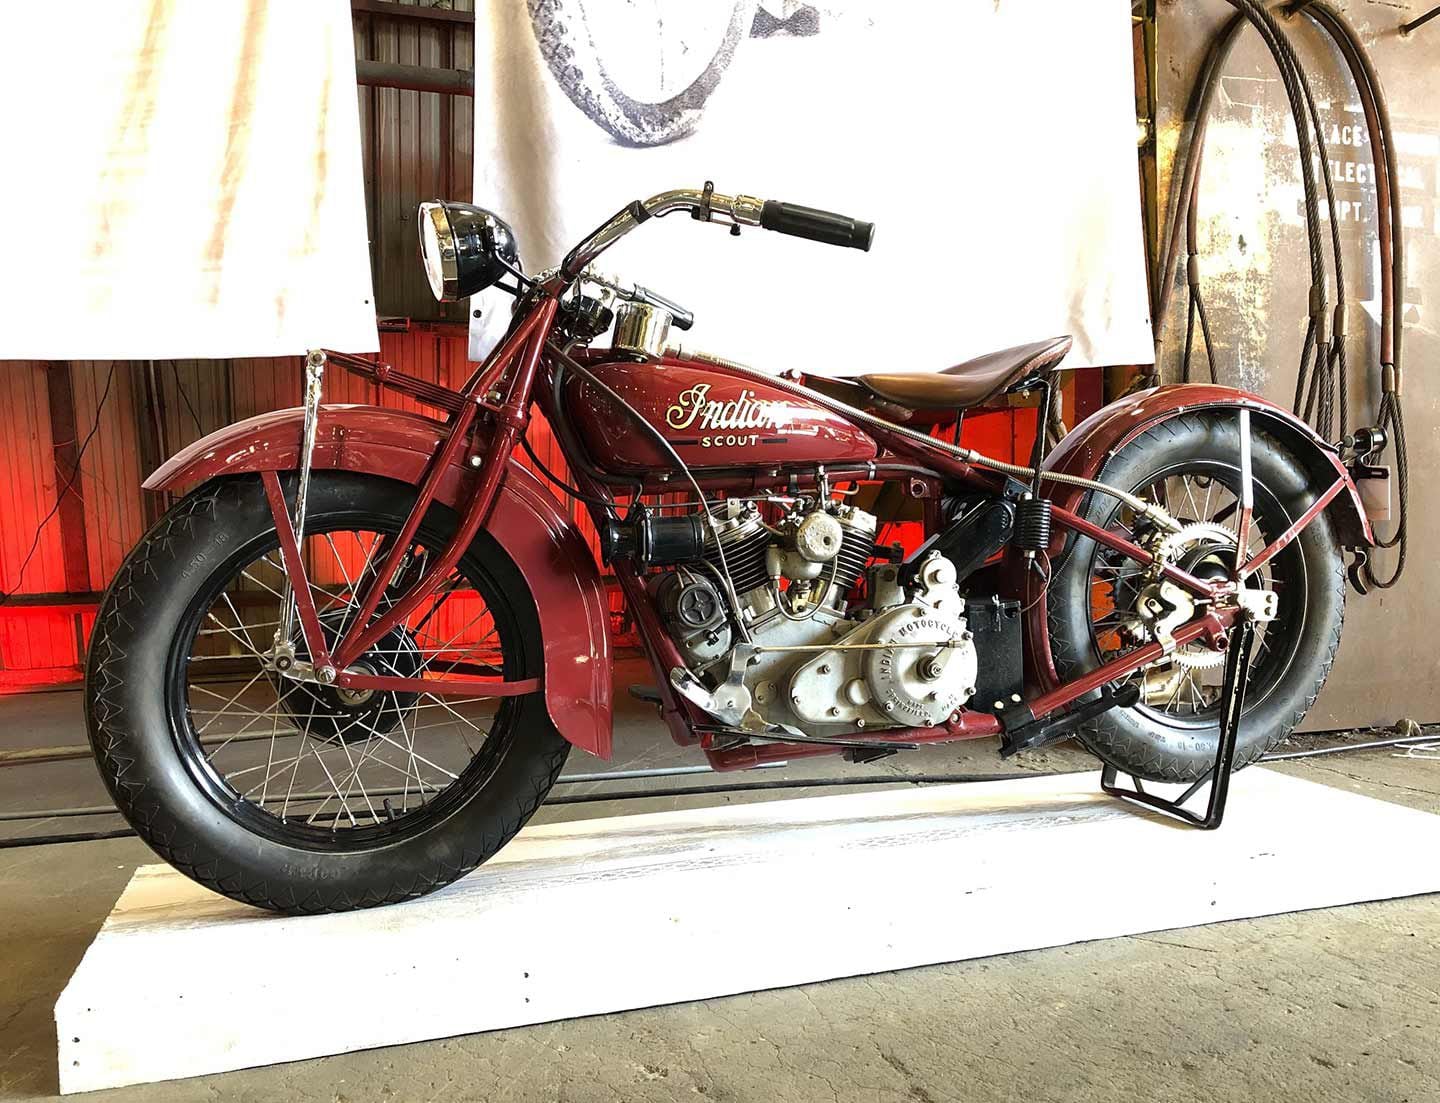 Indian Motorcycle brought its late-1920s-era 101 Scout to display.